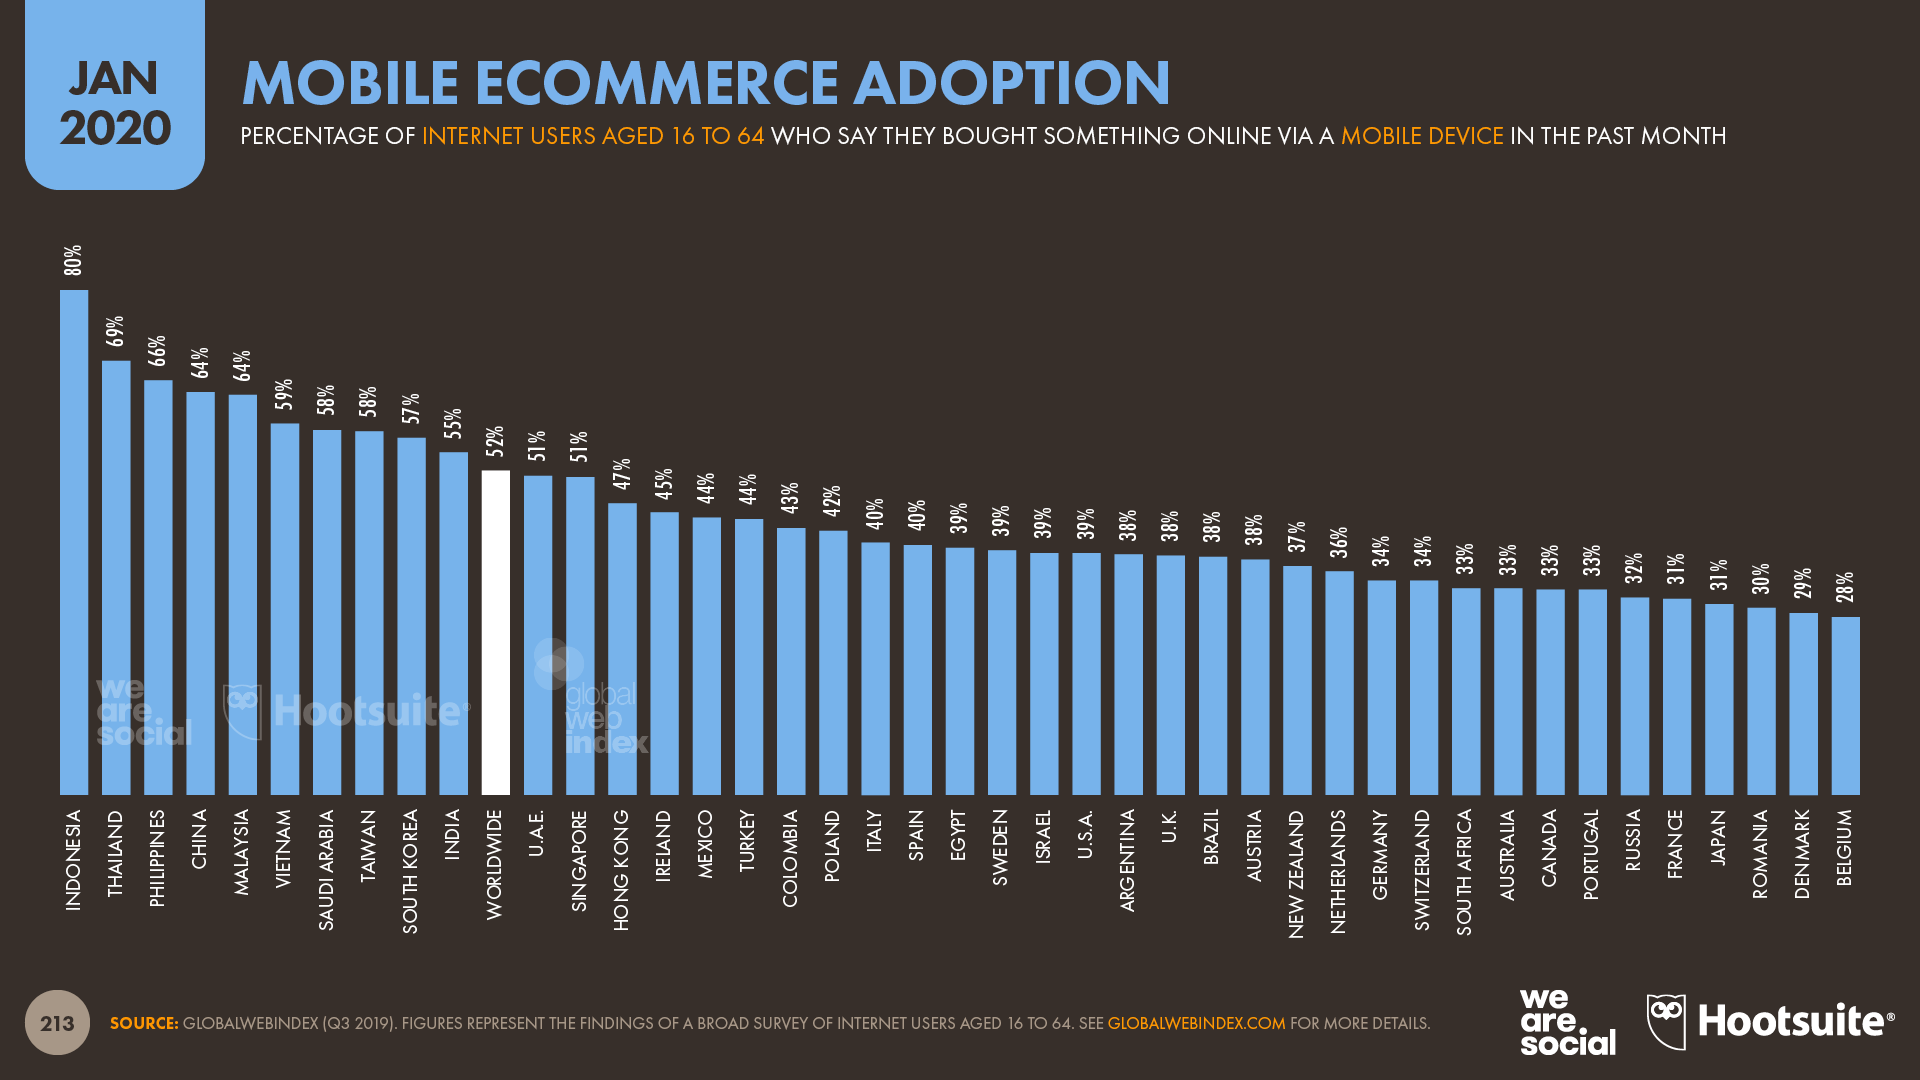 Mobile Ecommerce Adoption by Country January 2020